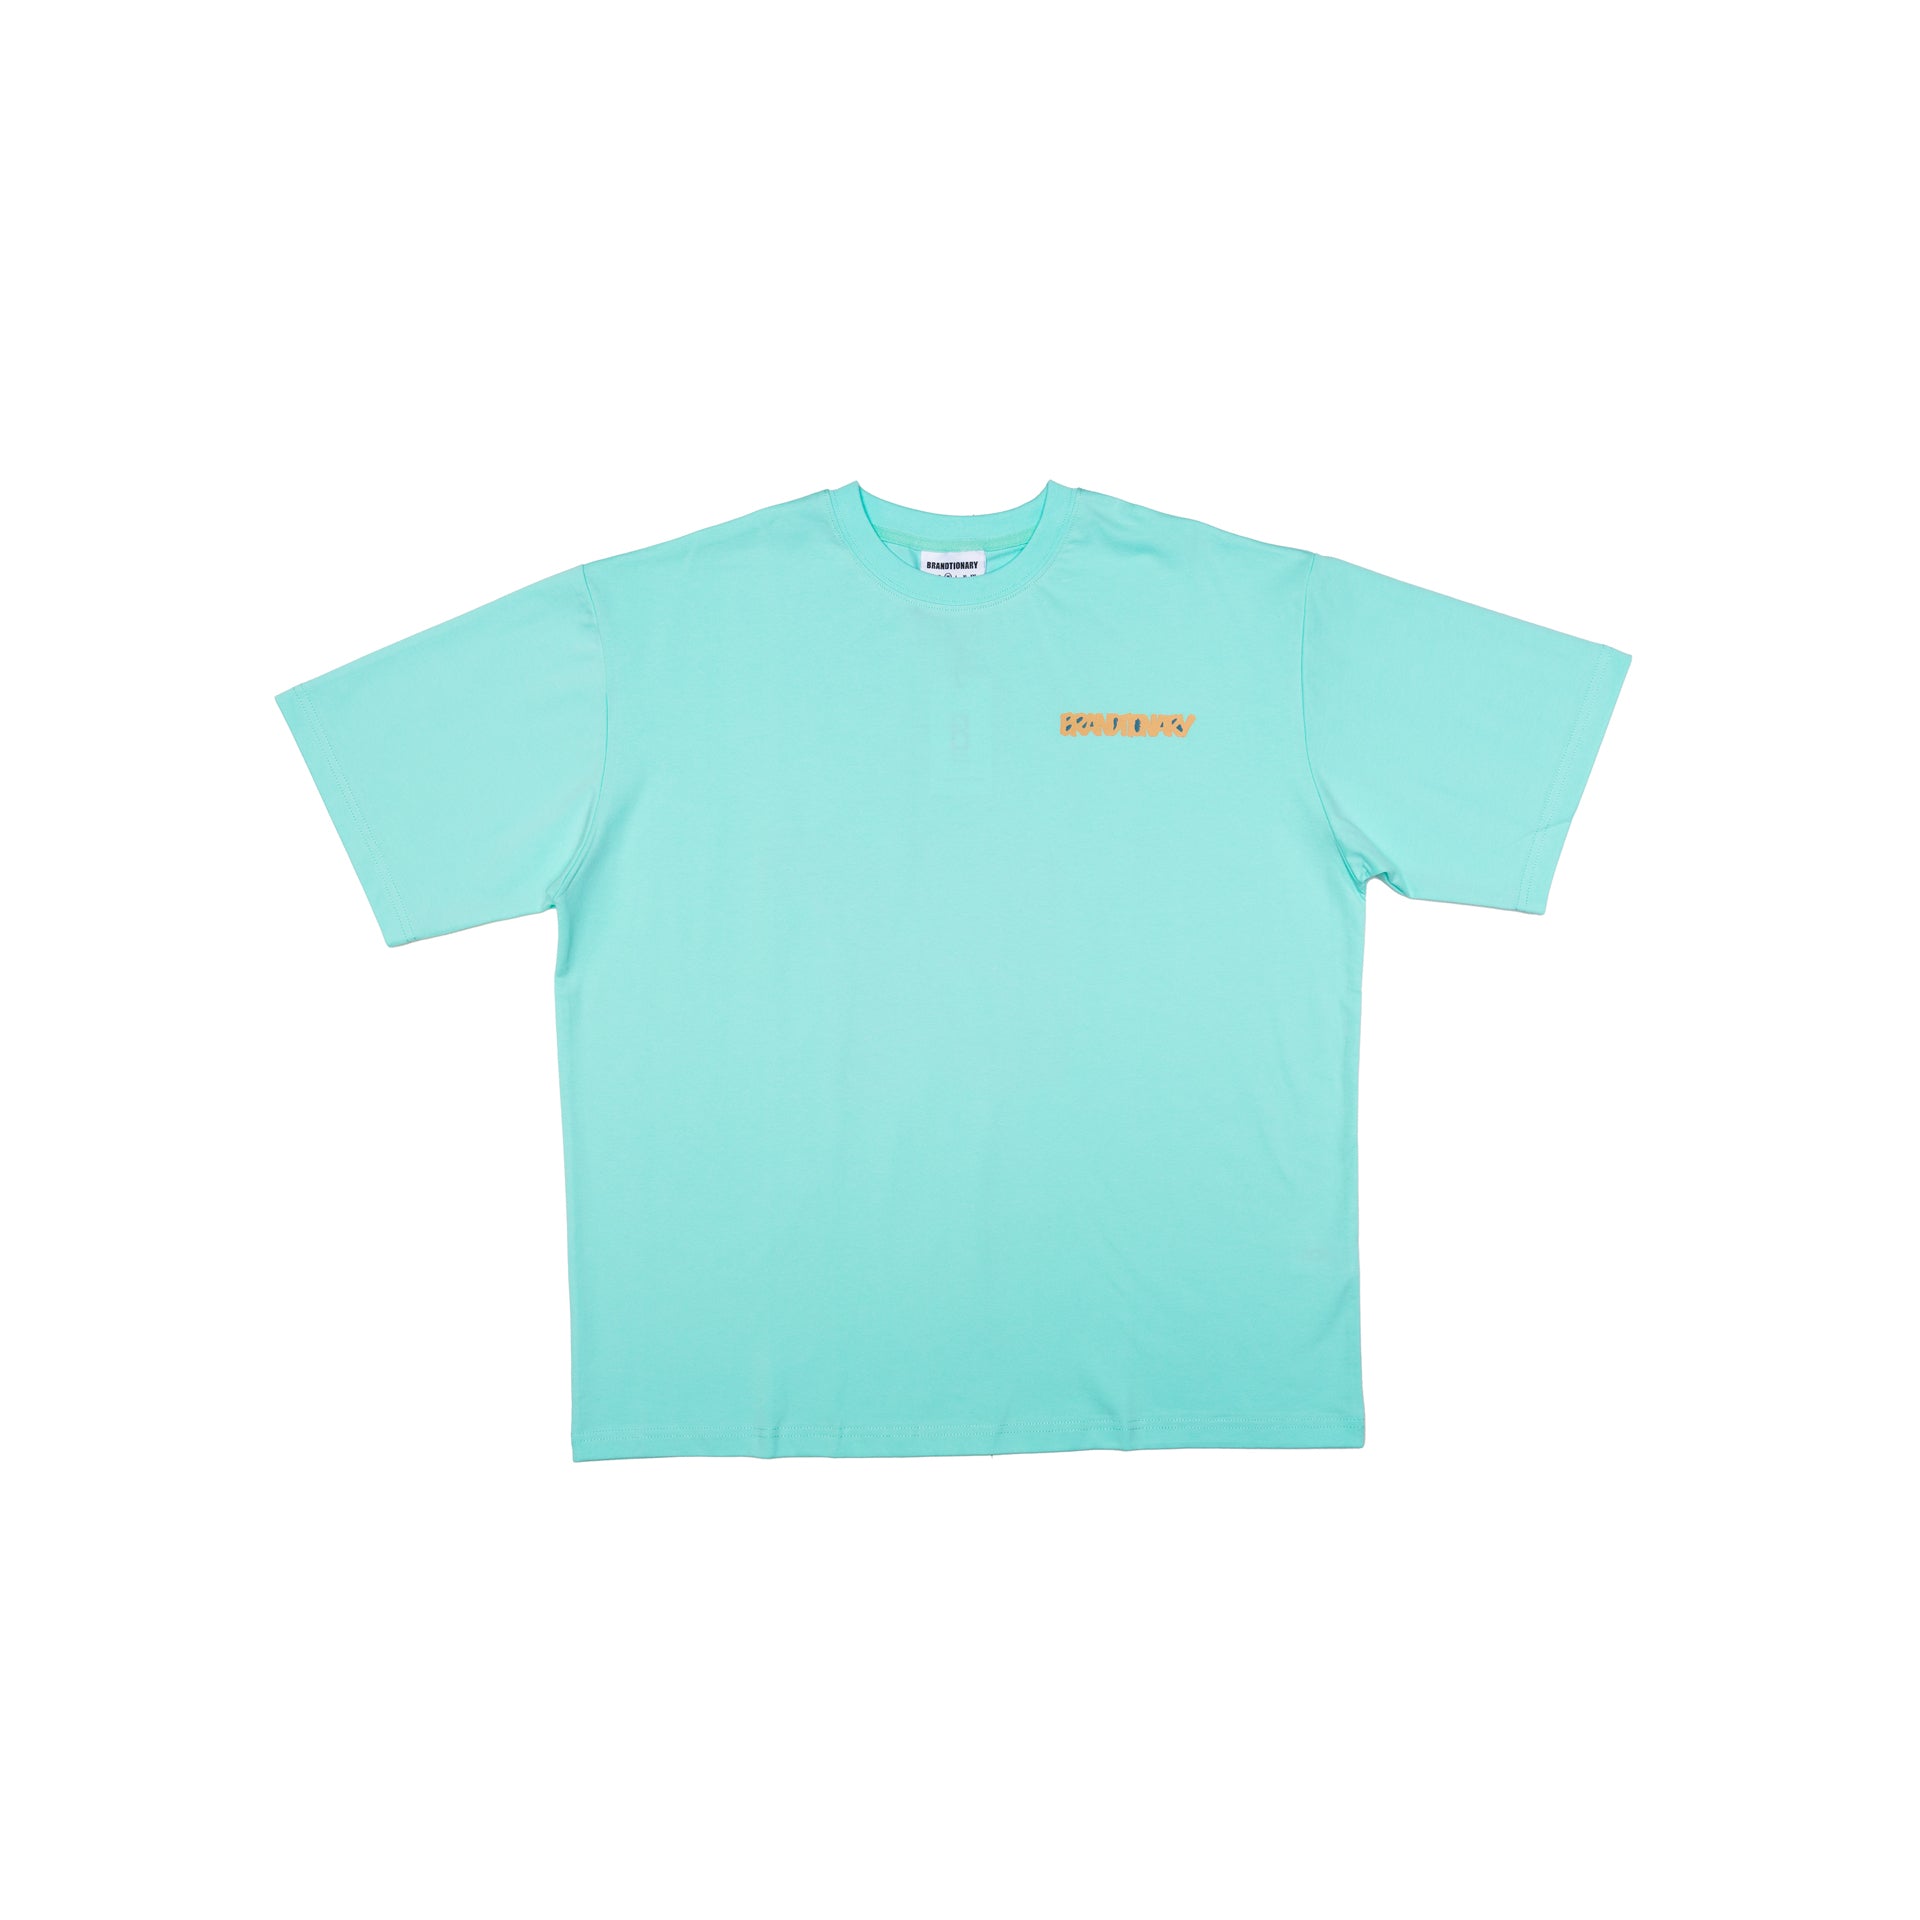 Turquoise T-shirt "Crown" by Brandtionary